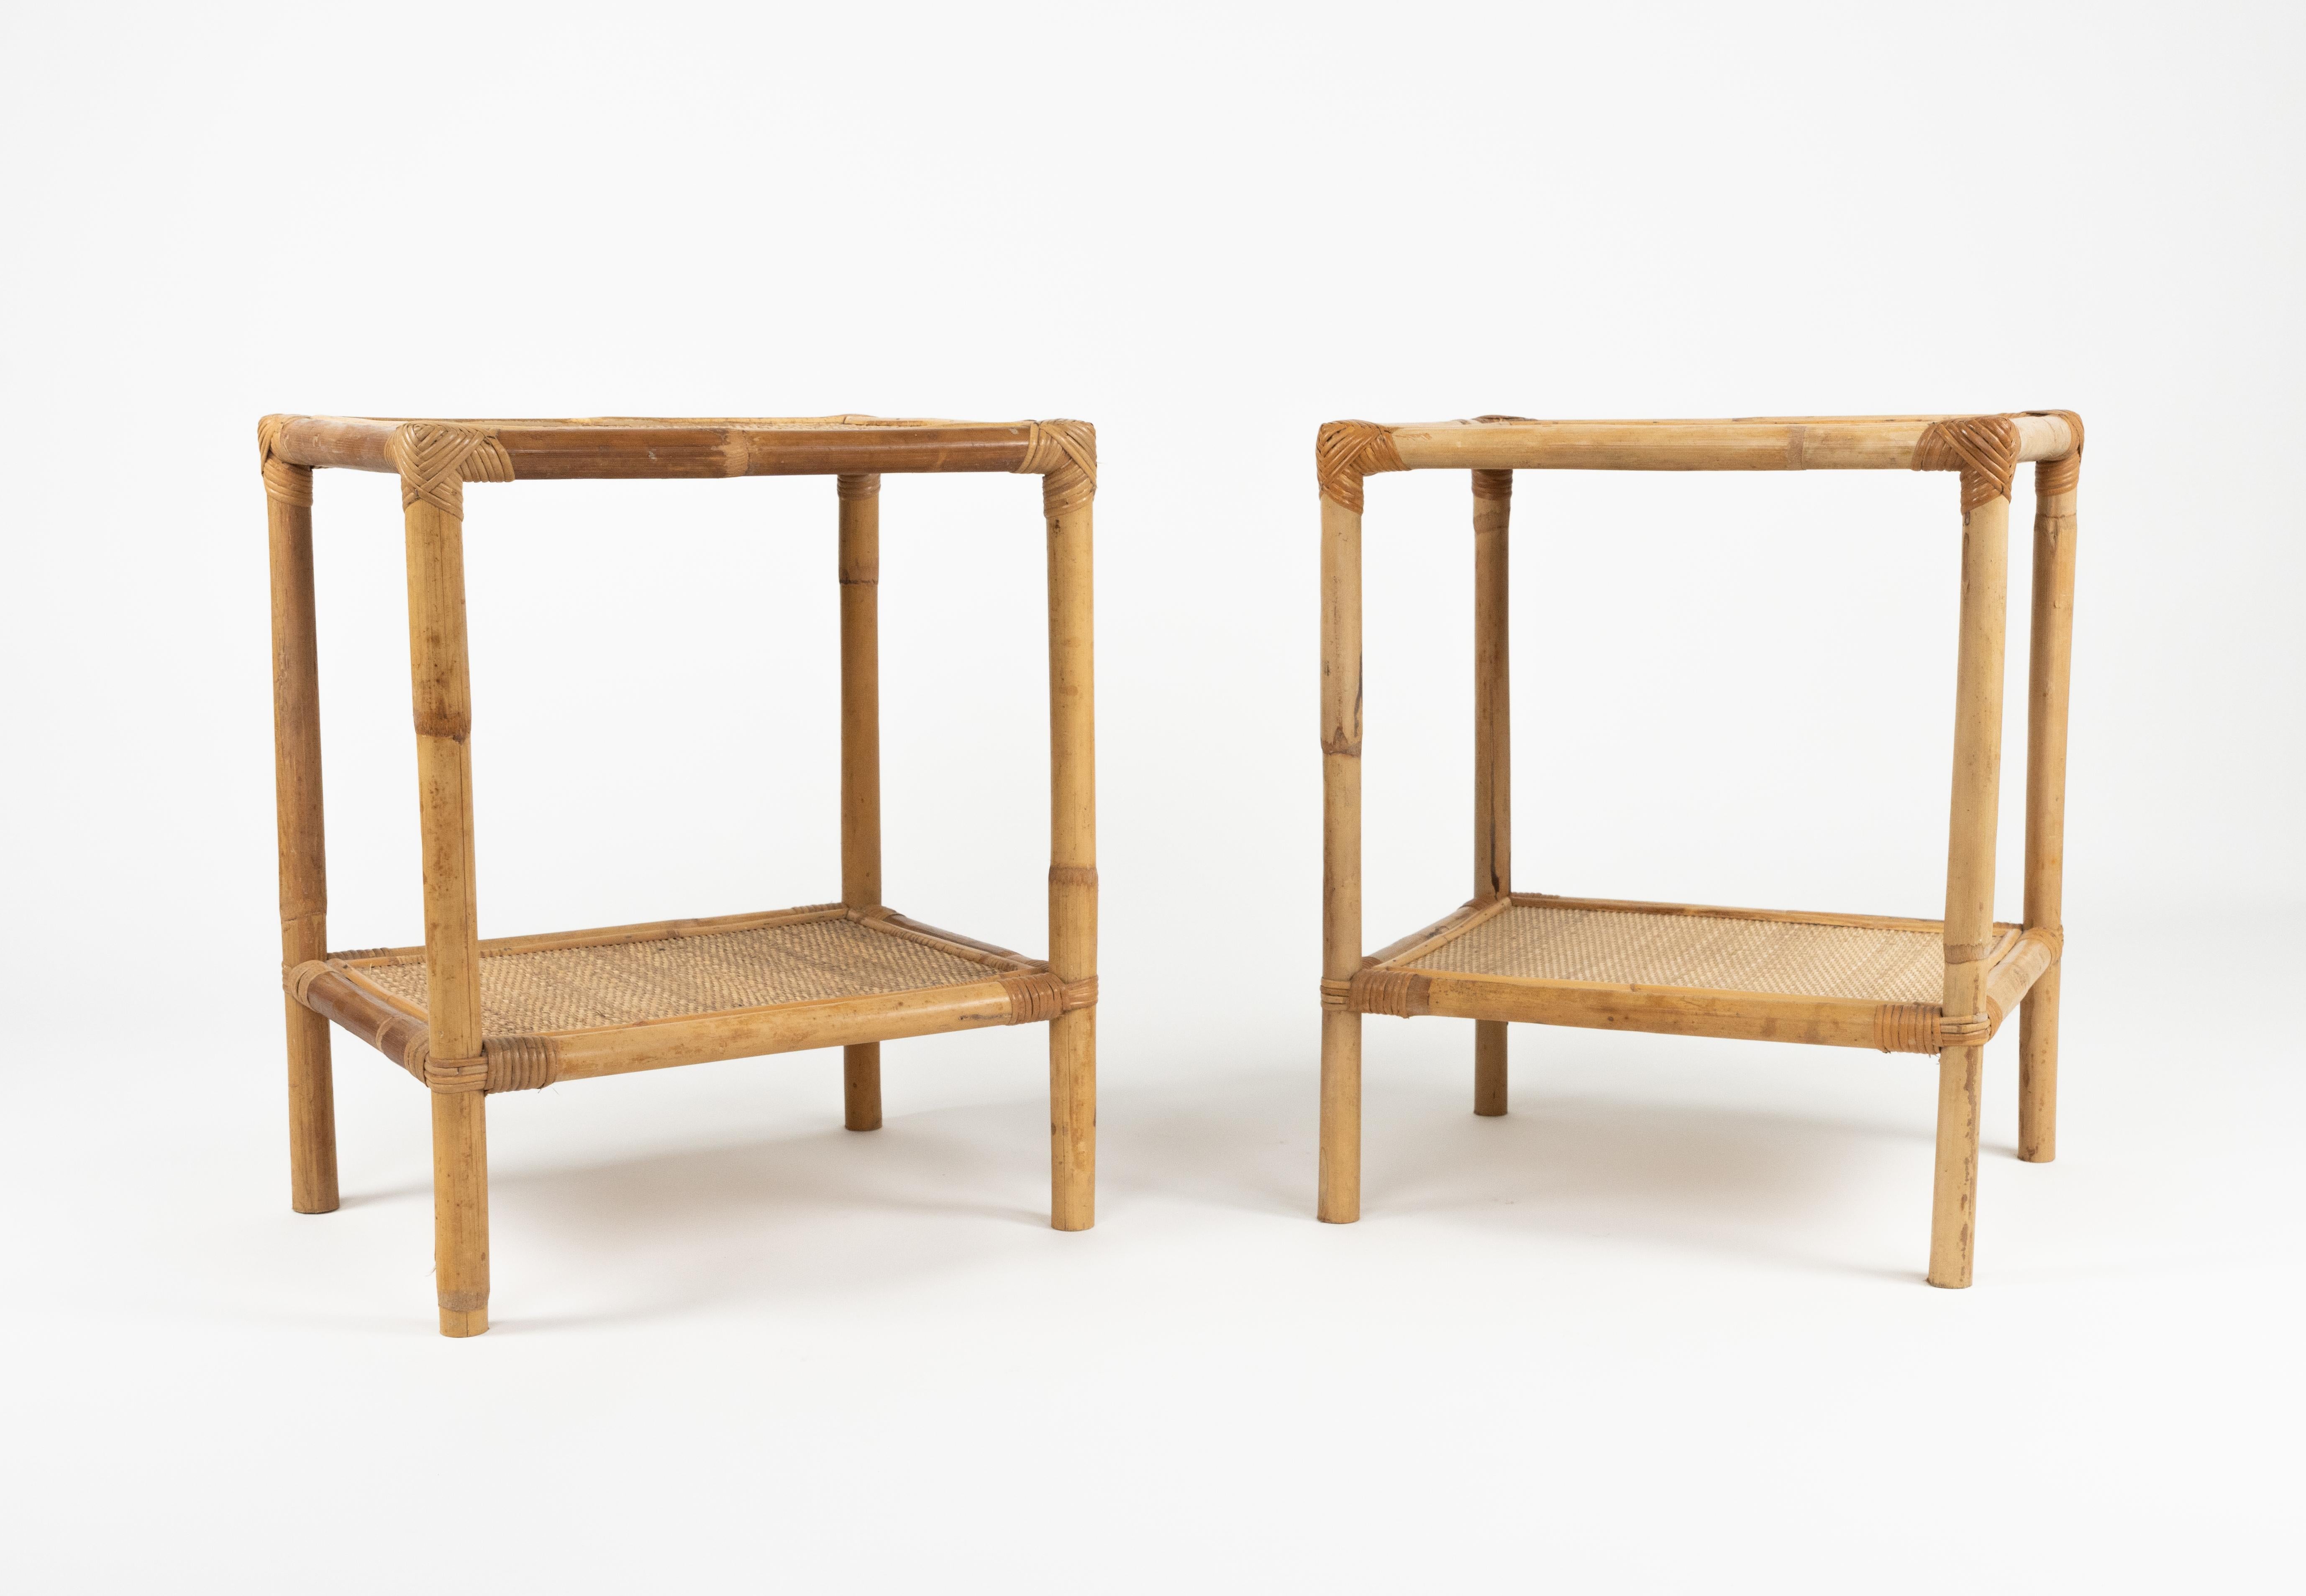 Midcentury Pair of Bed Side Tables in Bamboo, Rattan & Wicker, Italy 1970s For Sale 2